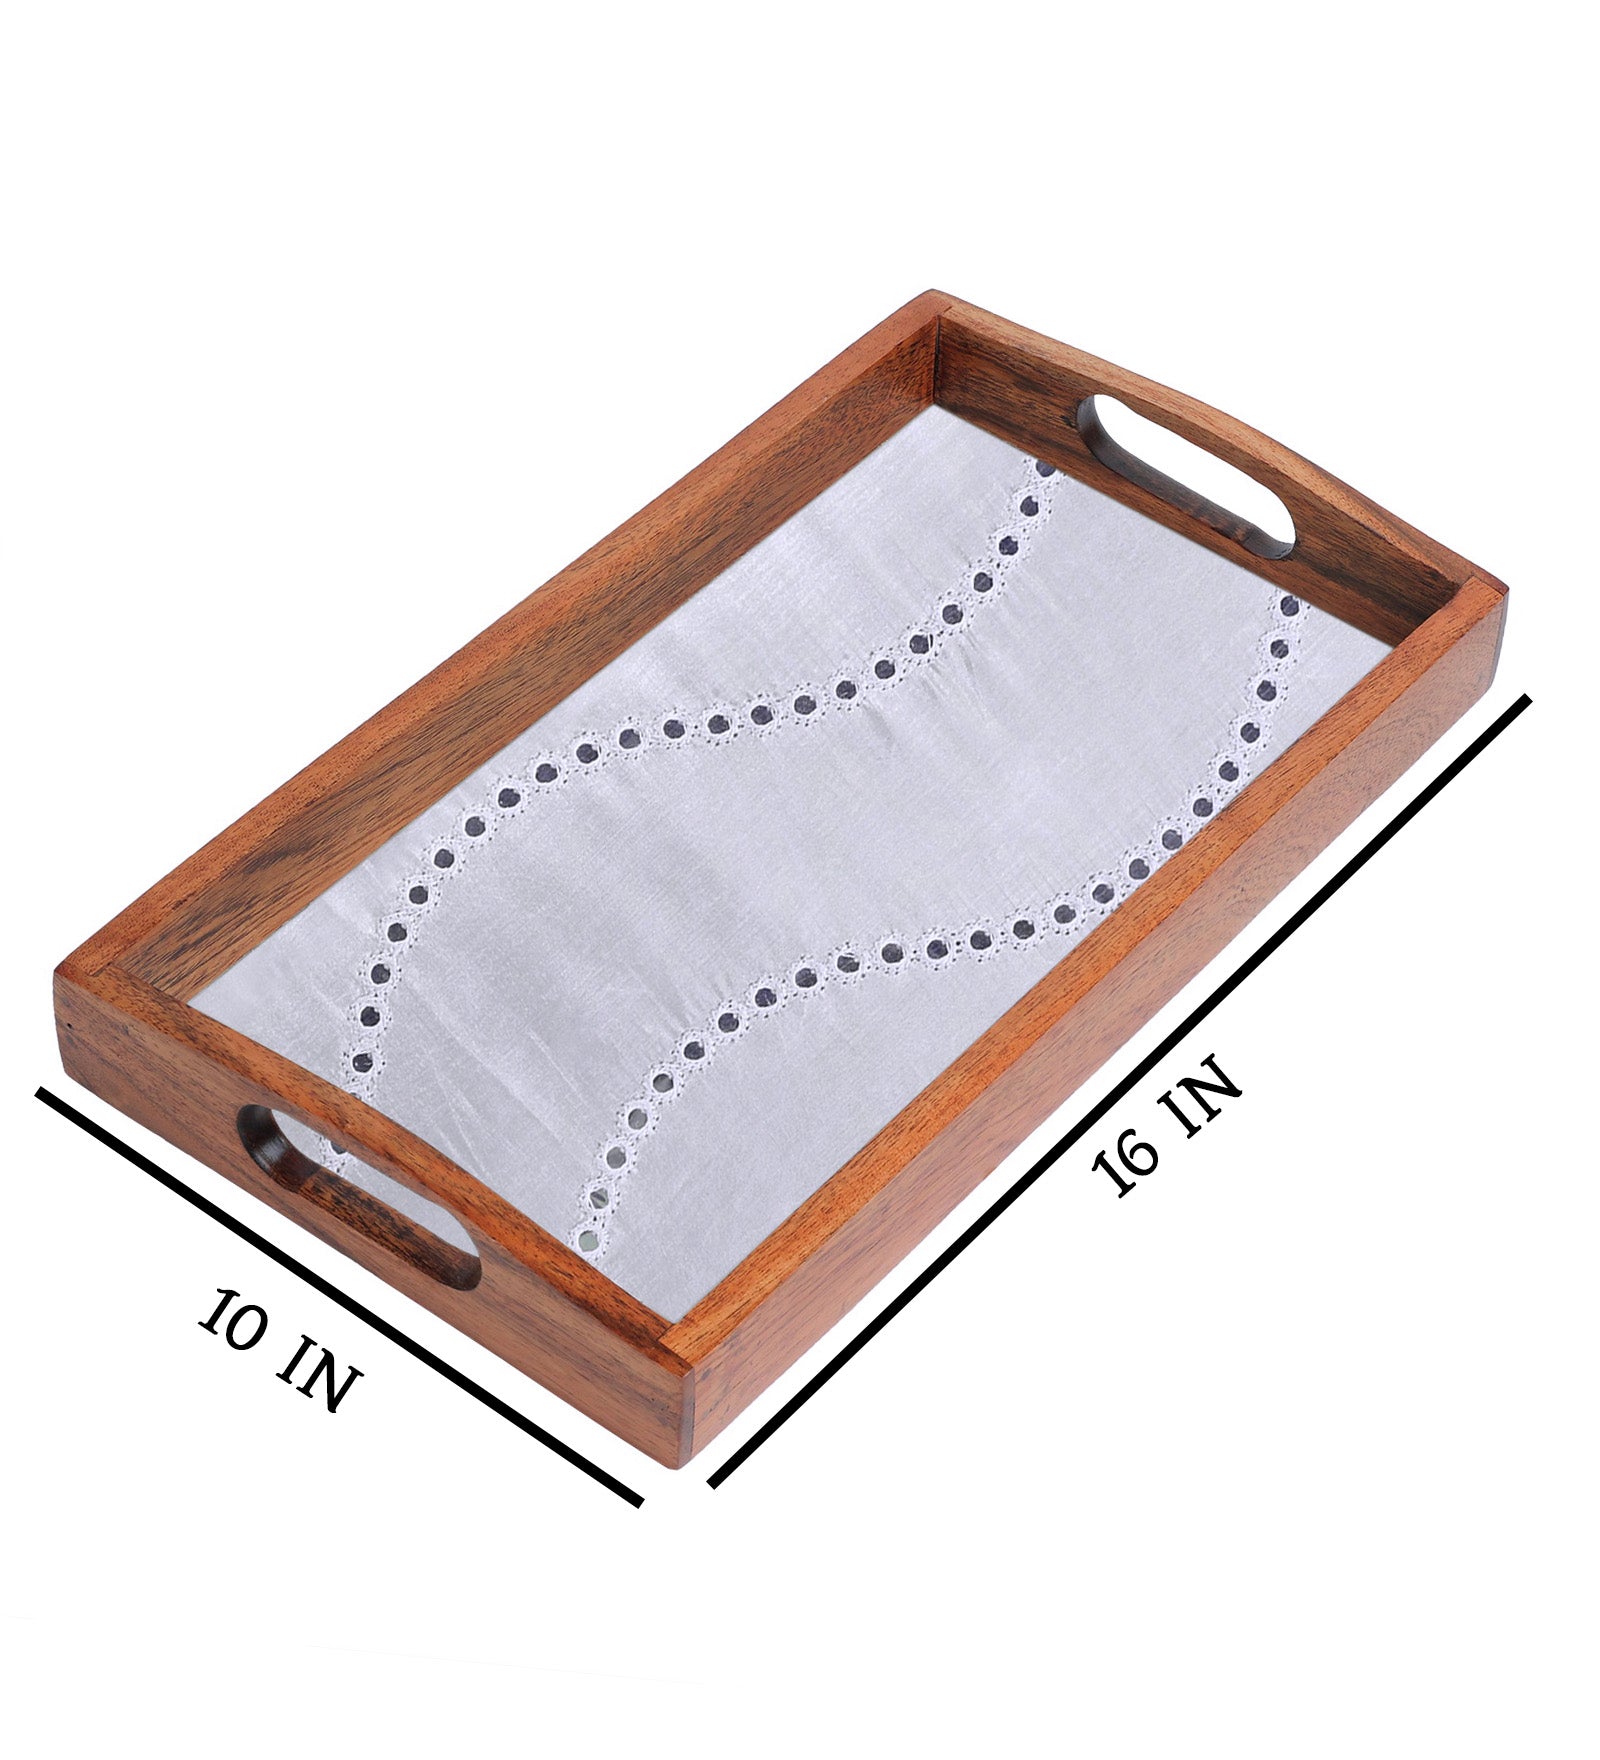 Decorative wooden serving tray 16"X 10"